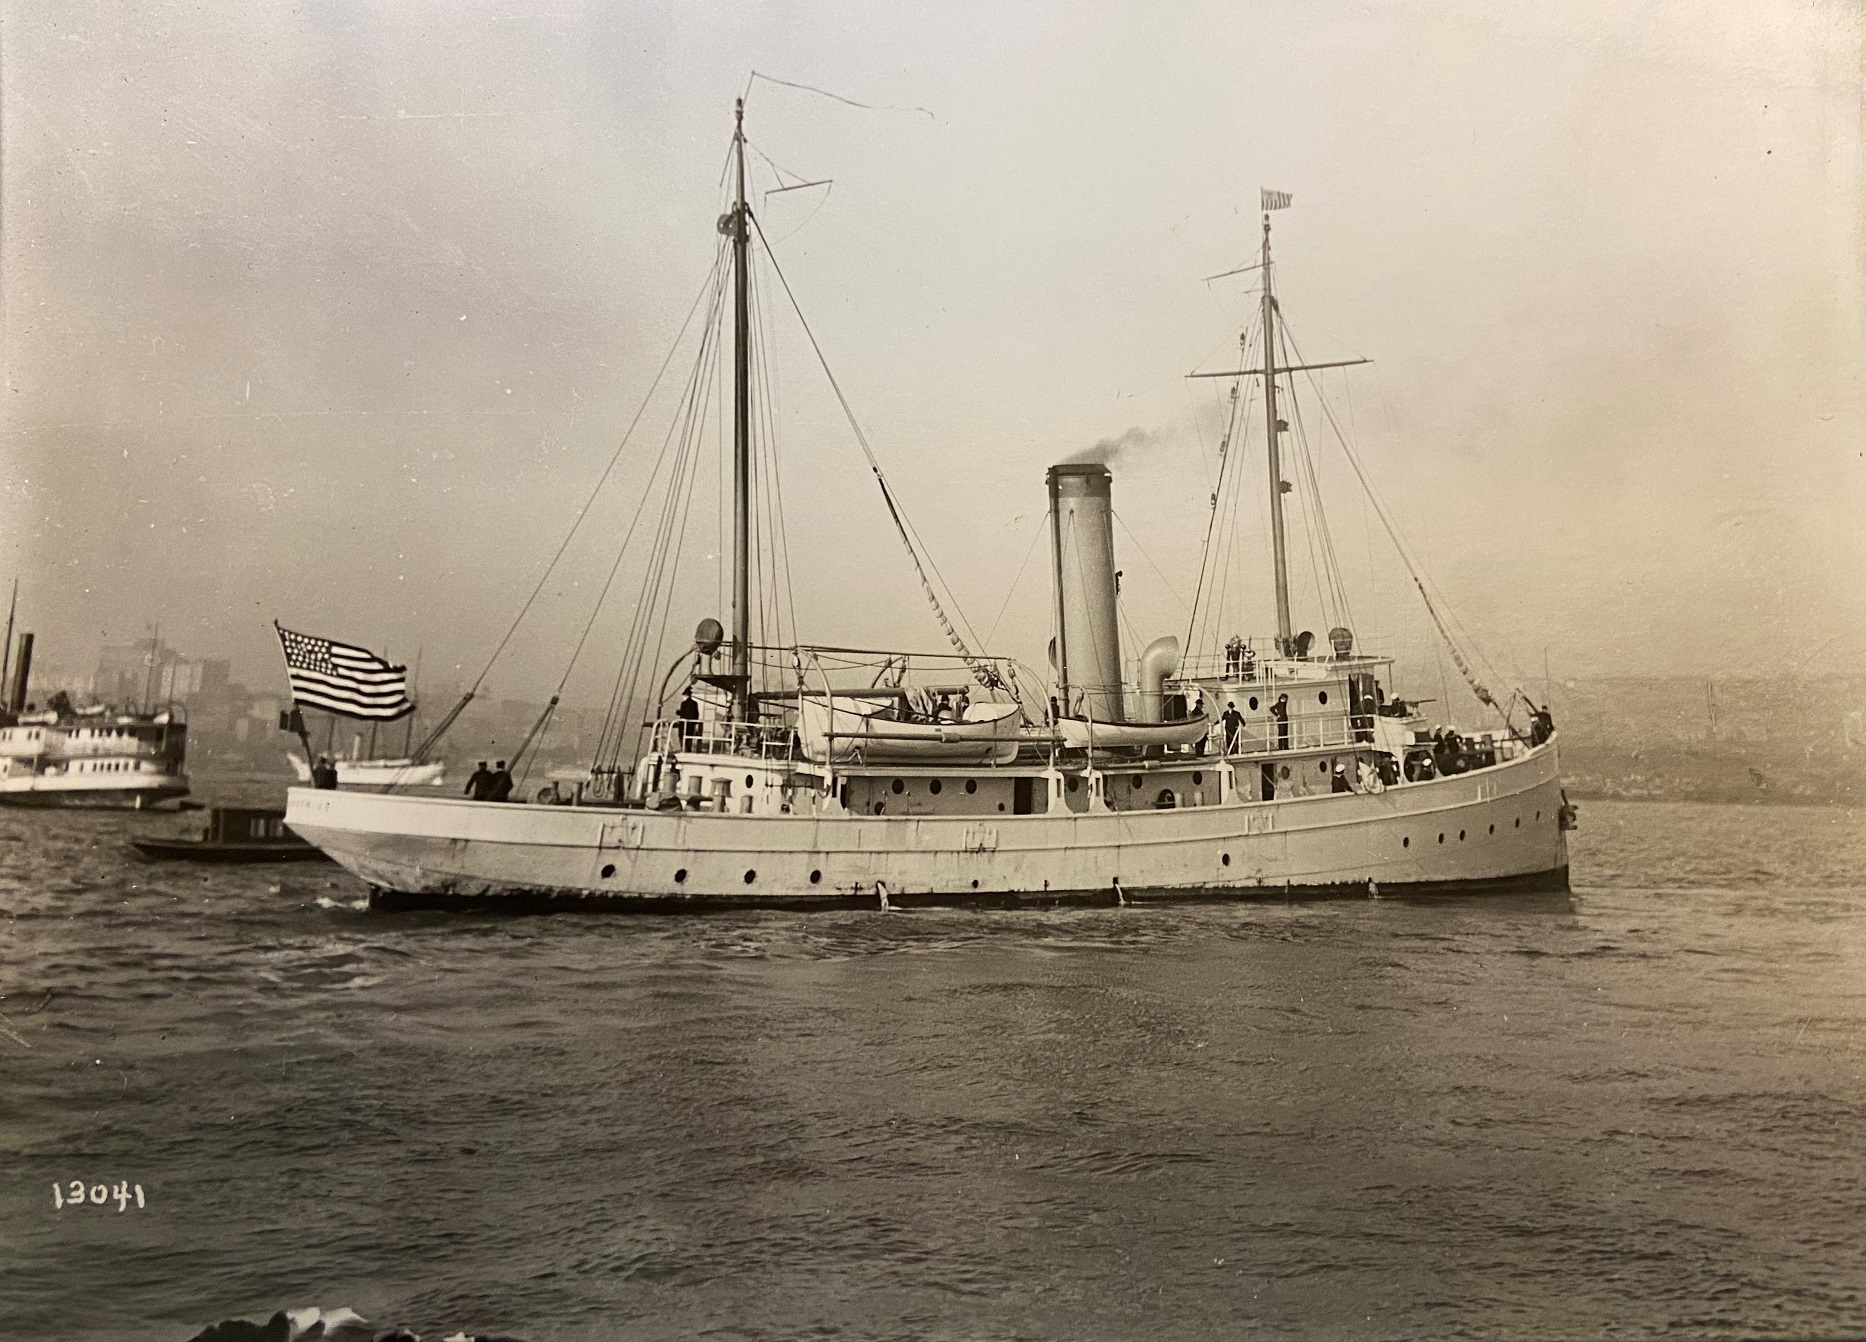 A rare photograph showing Snohomish from the stern. (U.S. Coast Guard)